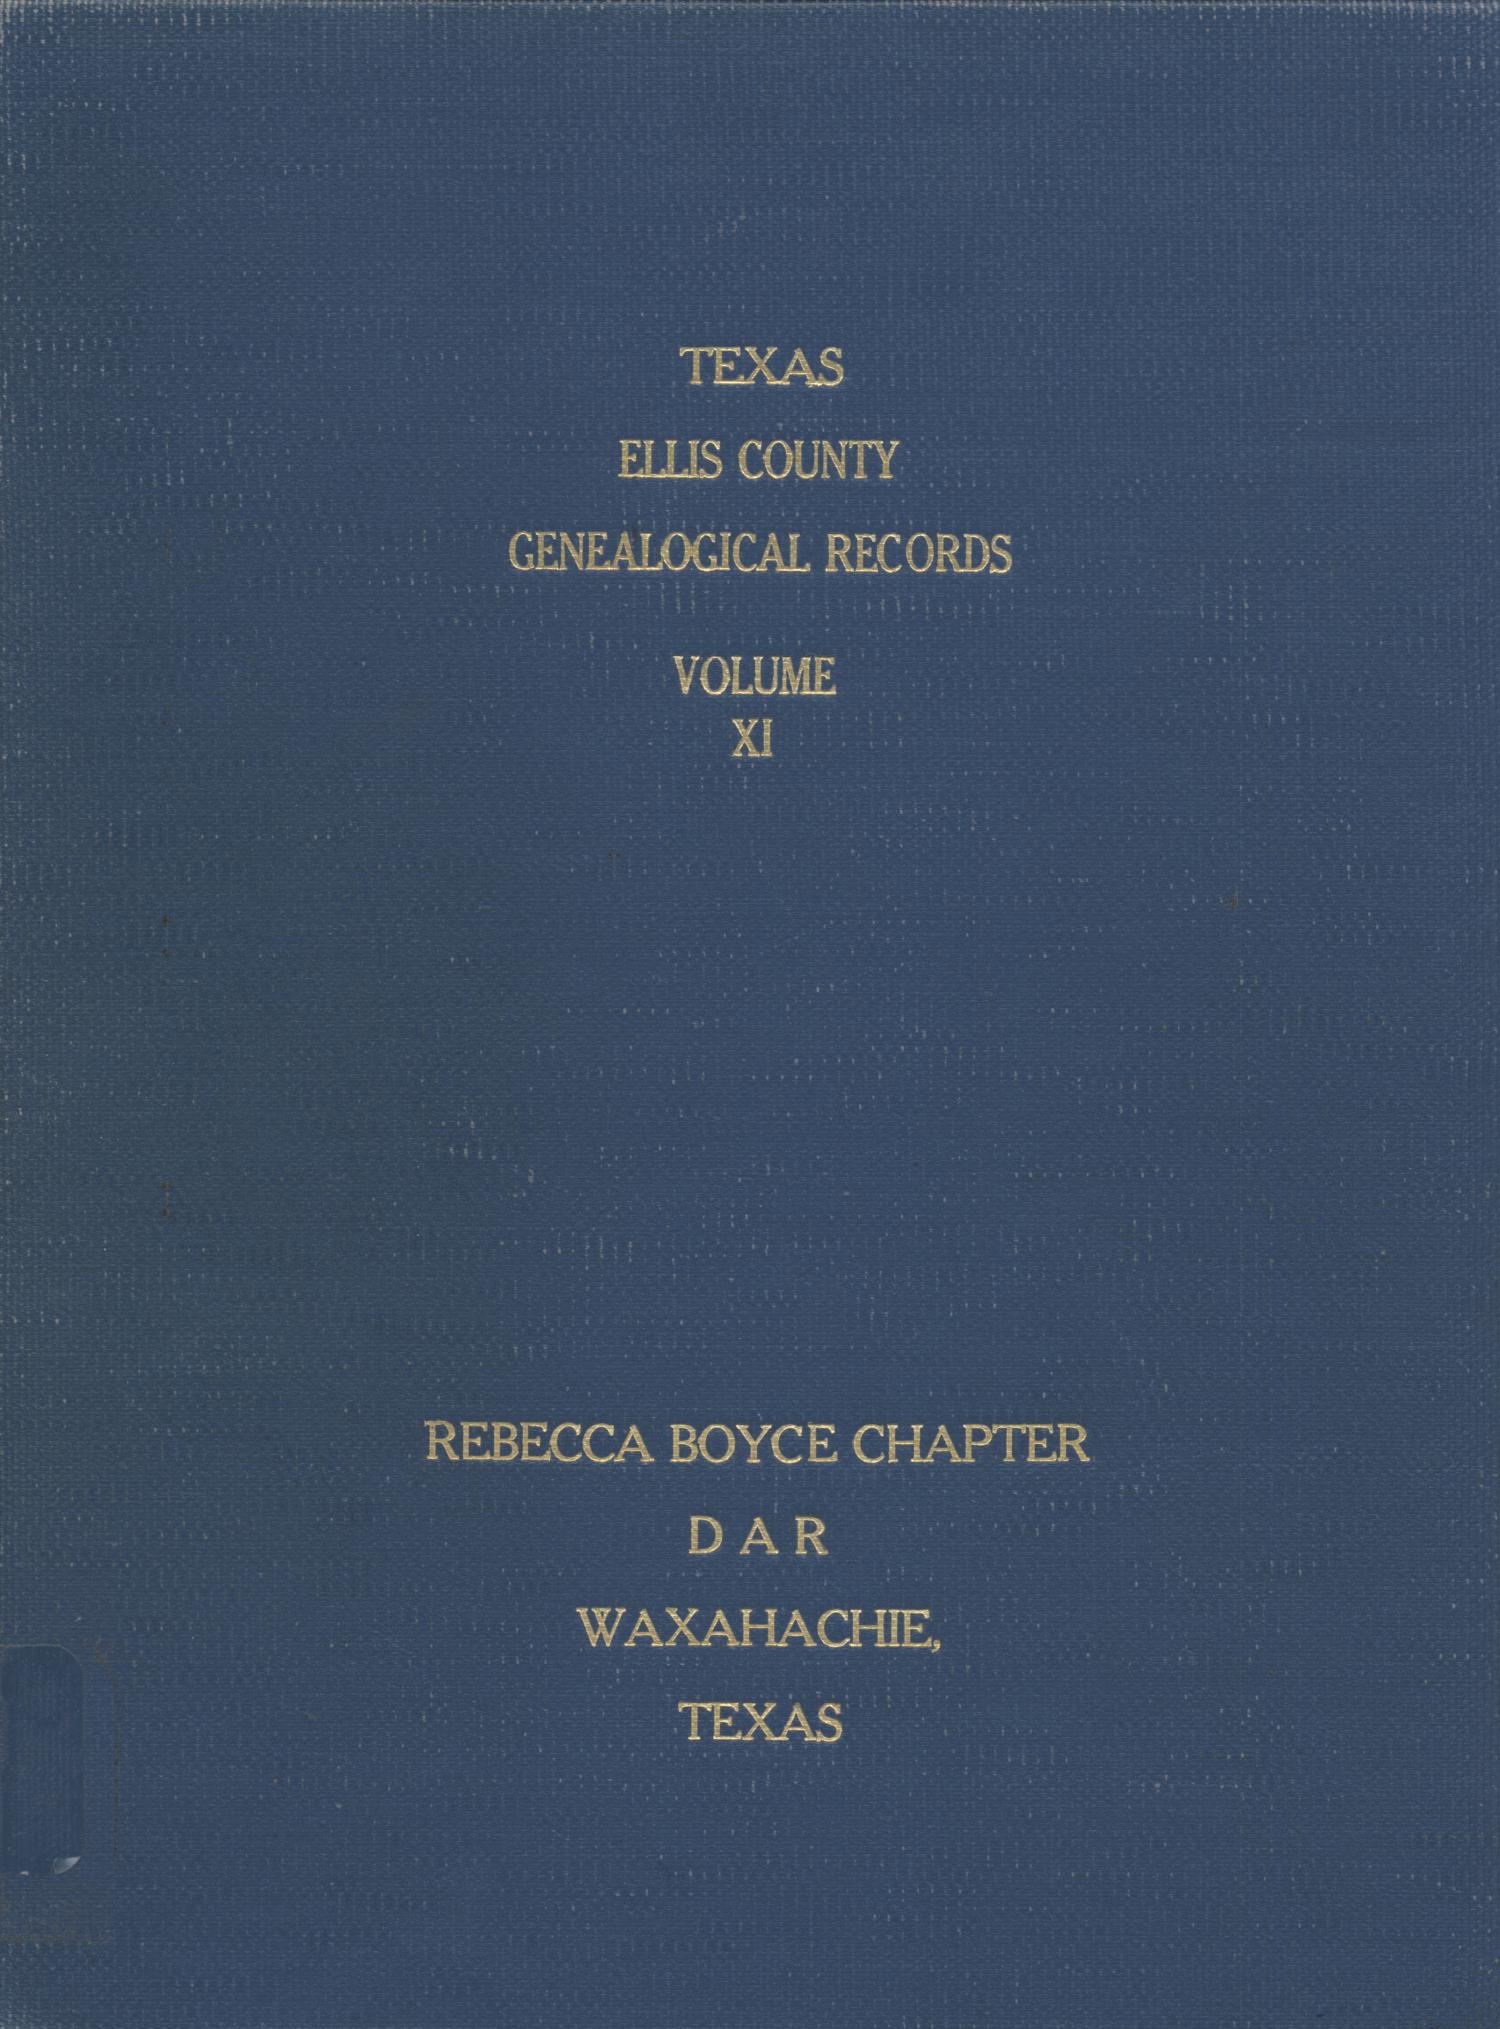 Texas Genealogical Records, Ellis County, Volume 11, 1700-1957
                                                
                                                    Front Cover
                                                